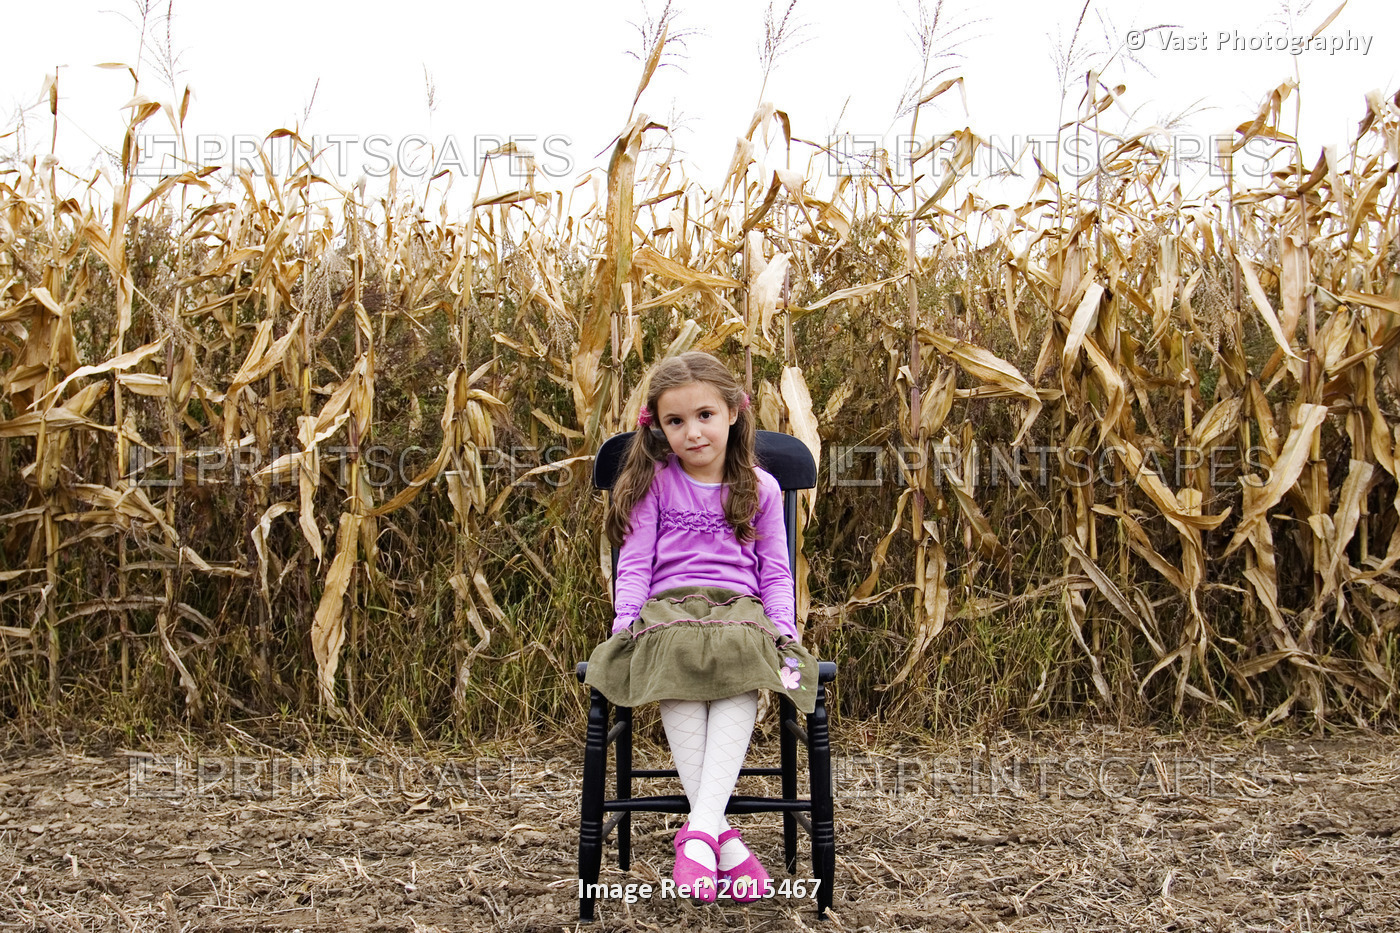 Young Girl Sitting On Chair In Corn Field